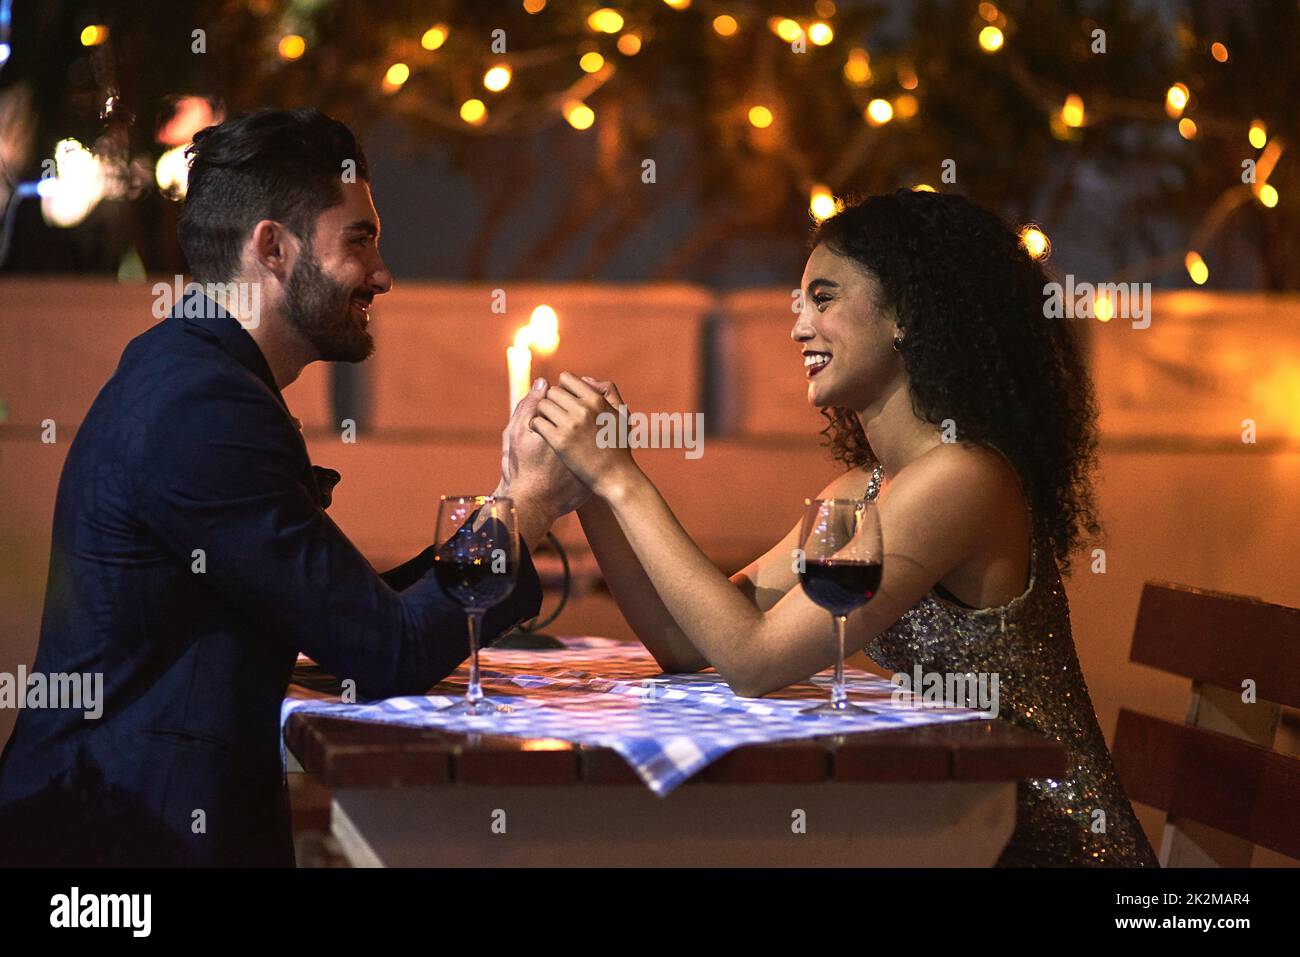 Some quality time with just you and me. Shot of a cheerful young couple holding hands while looking into each others eyes over a candle lit dinner date at night. Stock Photo